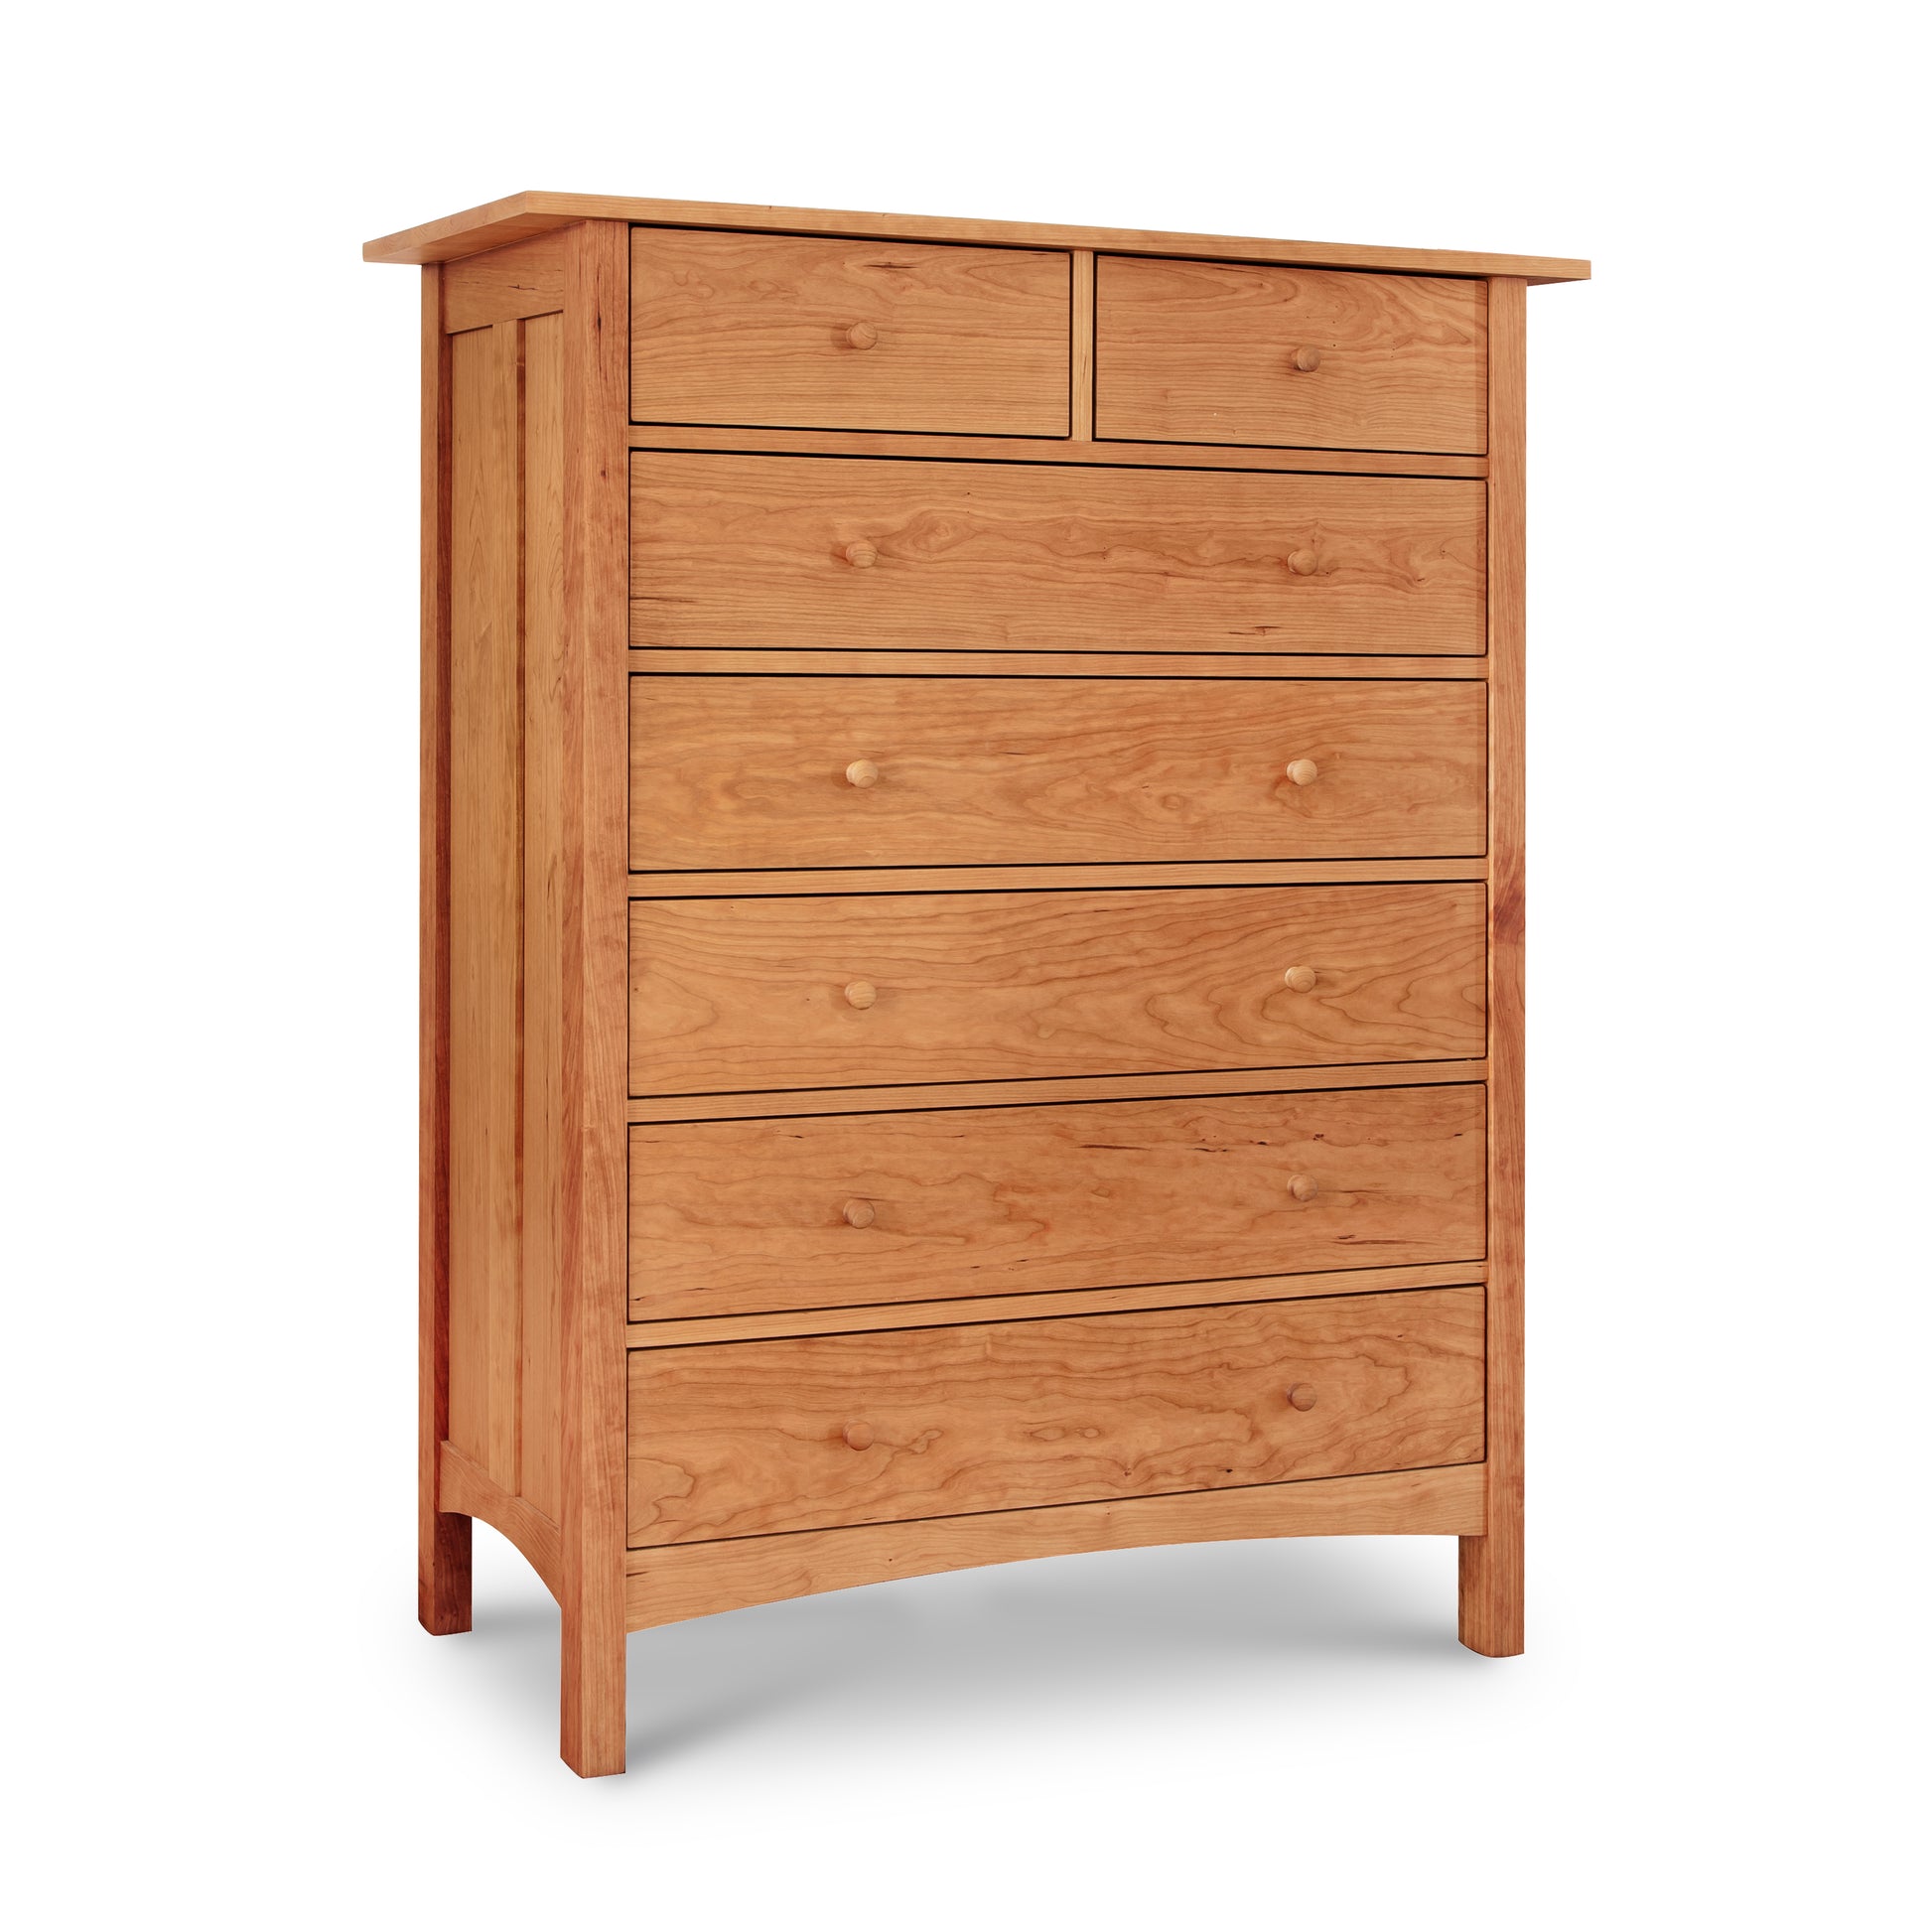 A Burlington Shaker 7-Drawer Chest by Vermont Furniture Designs on a white background.